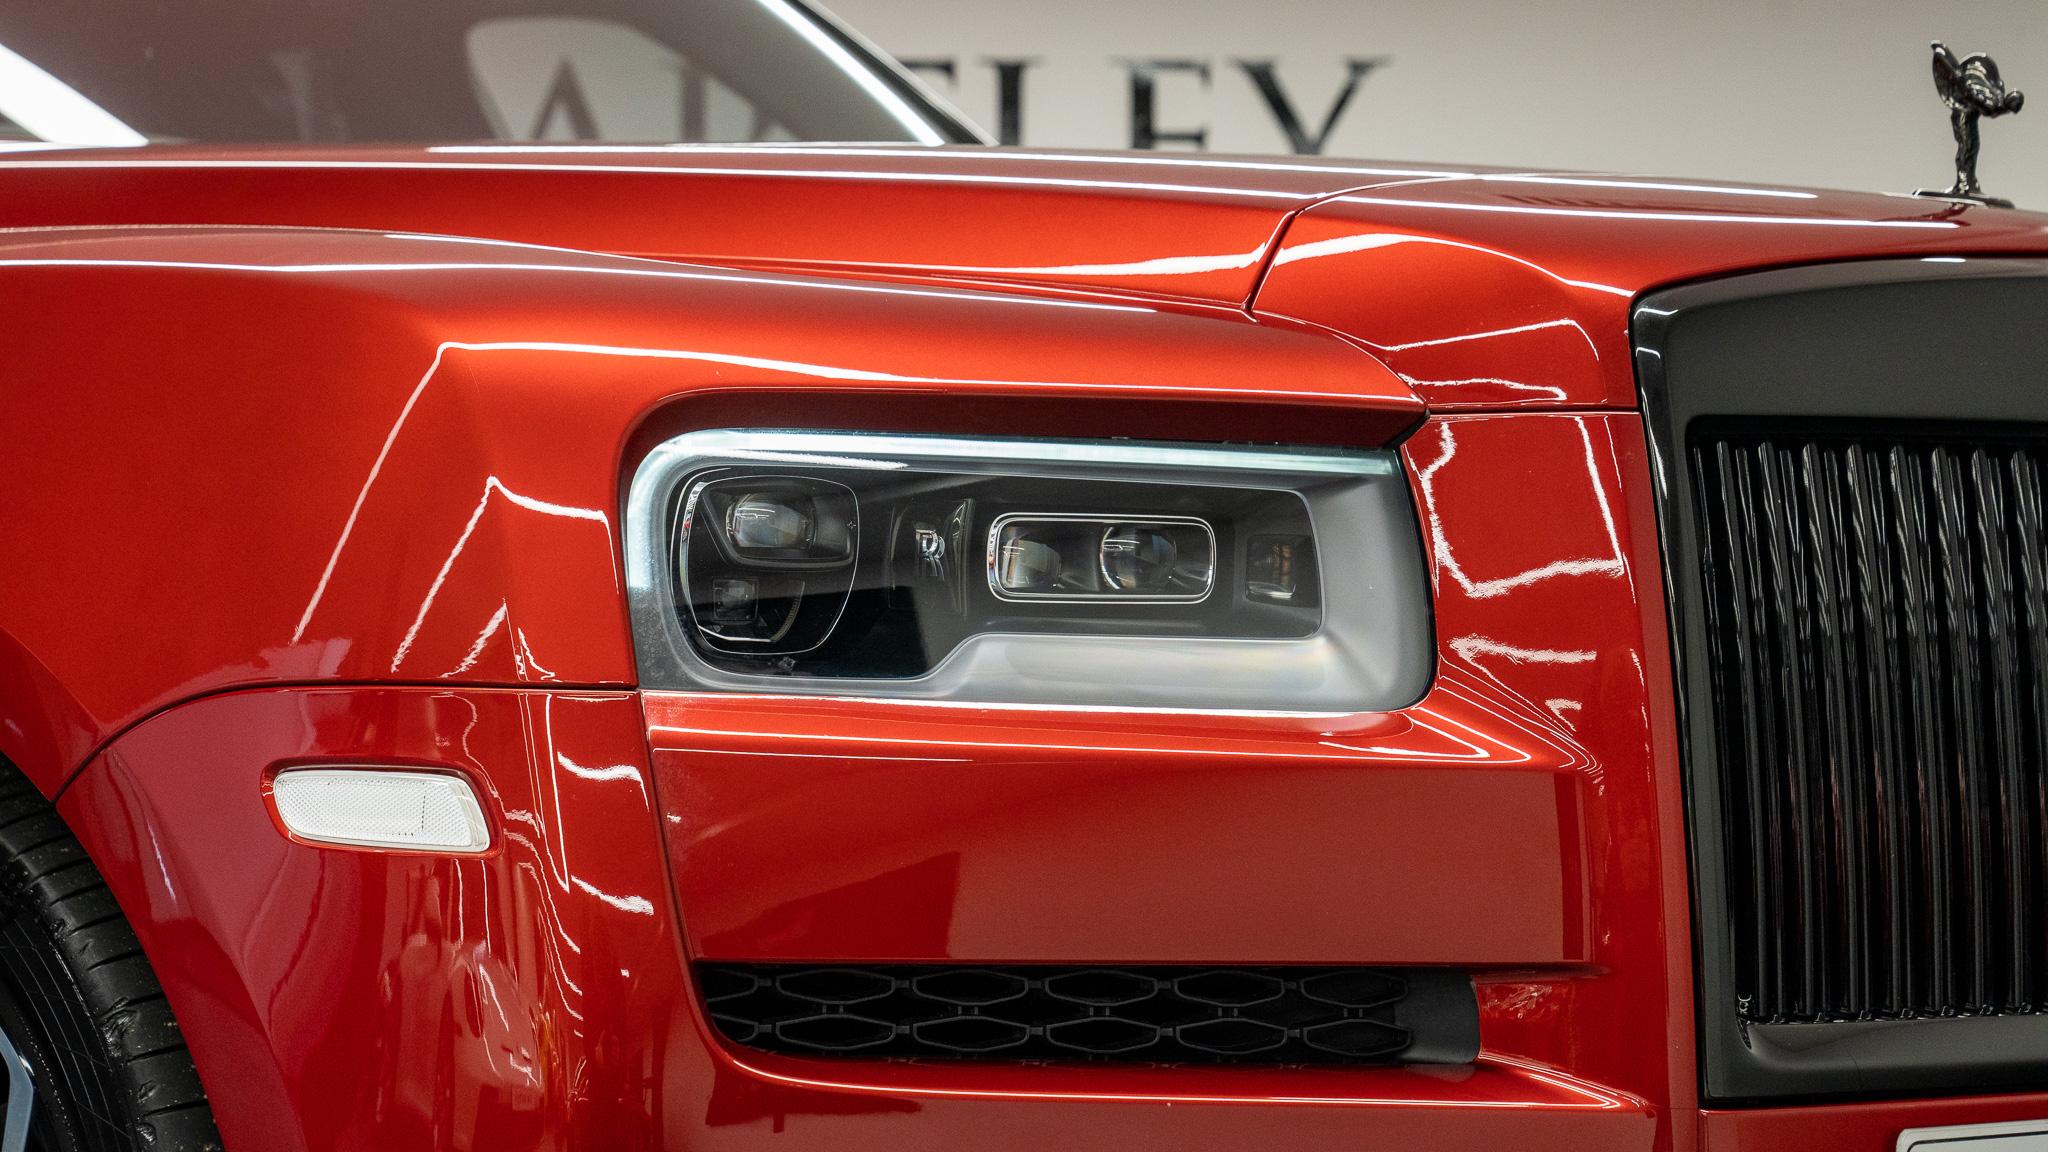 Bespoke St James Wraith Is A Very Red RollsRoyce  Carscoops